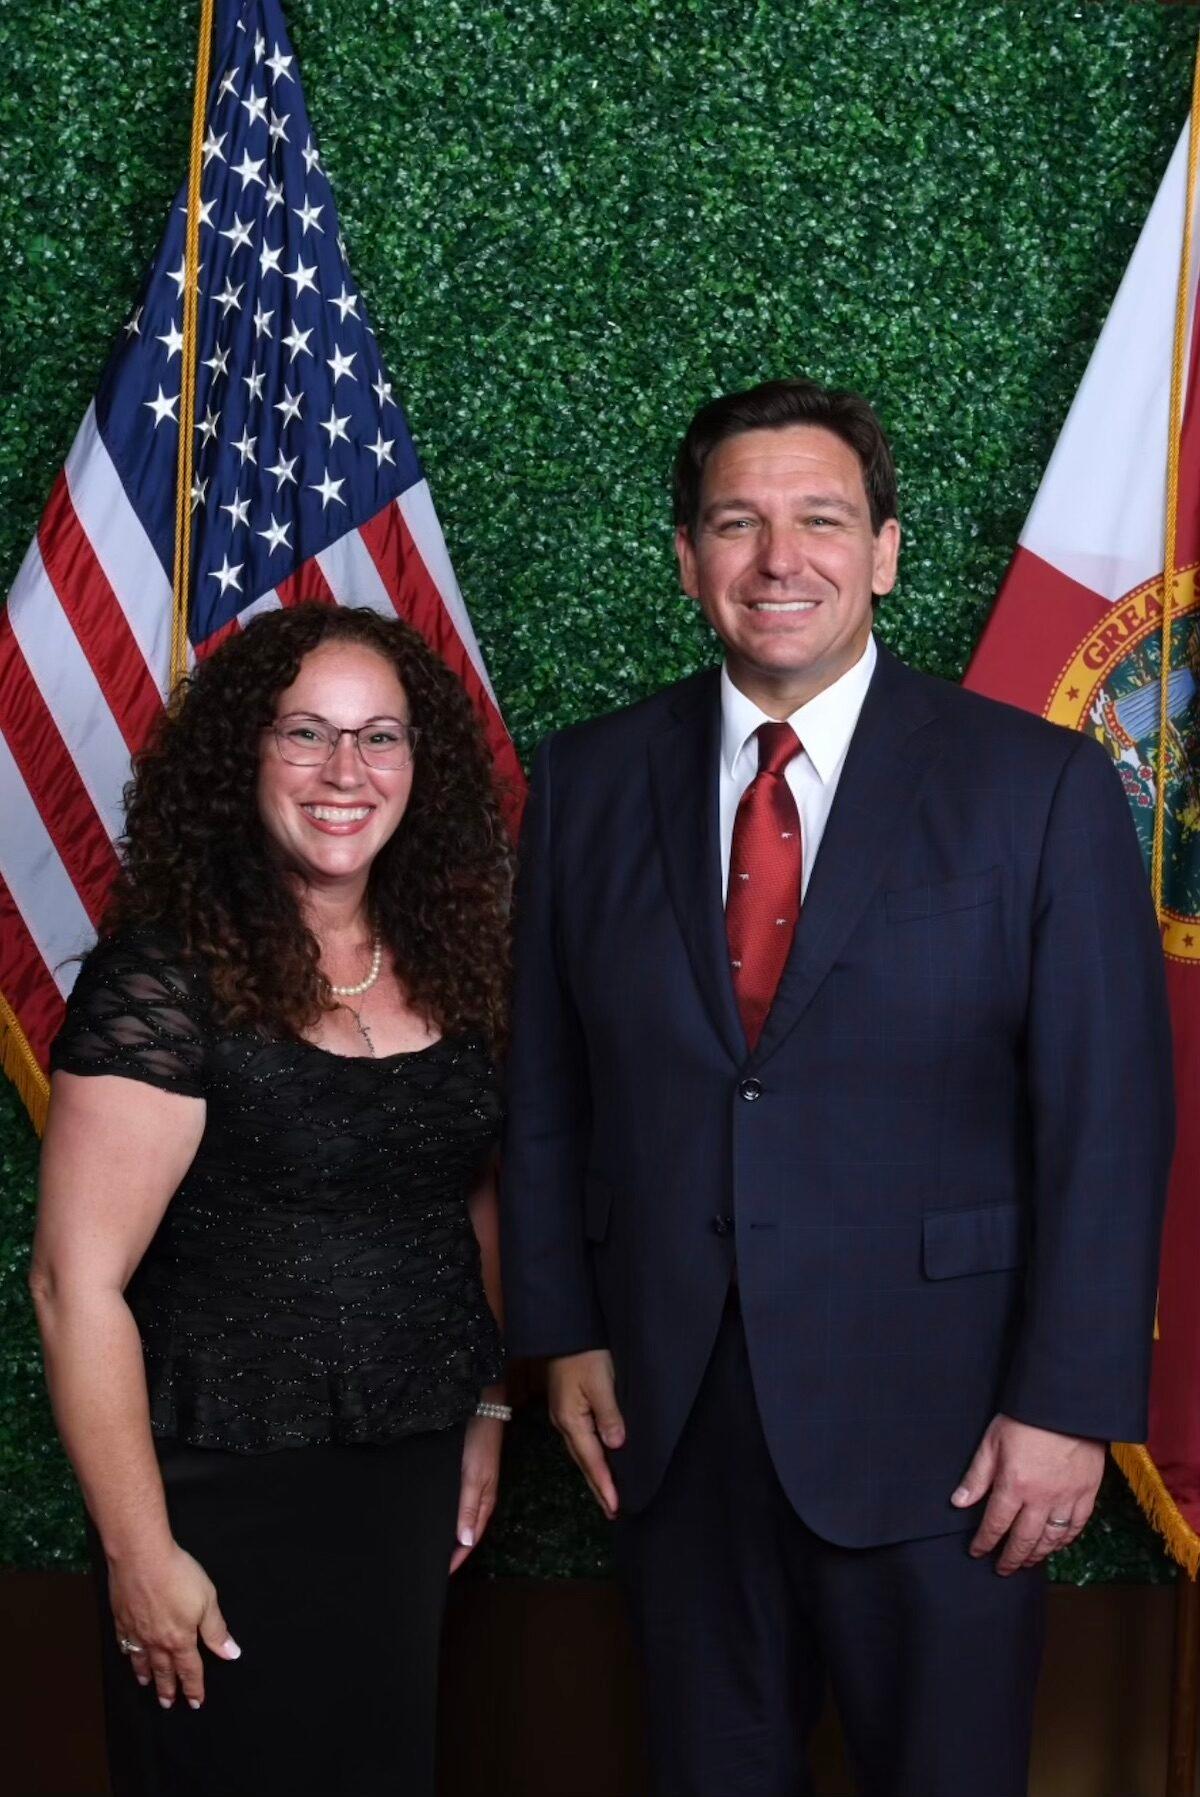 Gov. Ron DeSantis and Jacqueline Rosario at the Sunshine Summit in Hollywood, Fla., in July 2022. (Courtesy of Ron DeSantis for Governor)